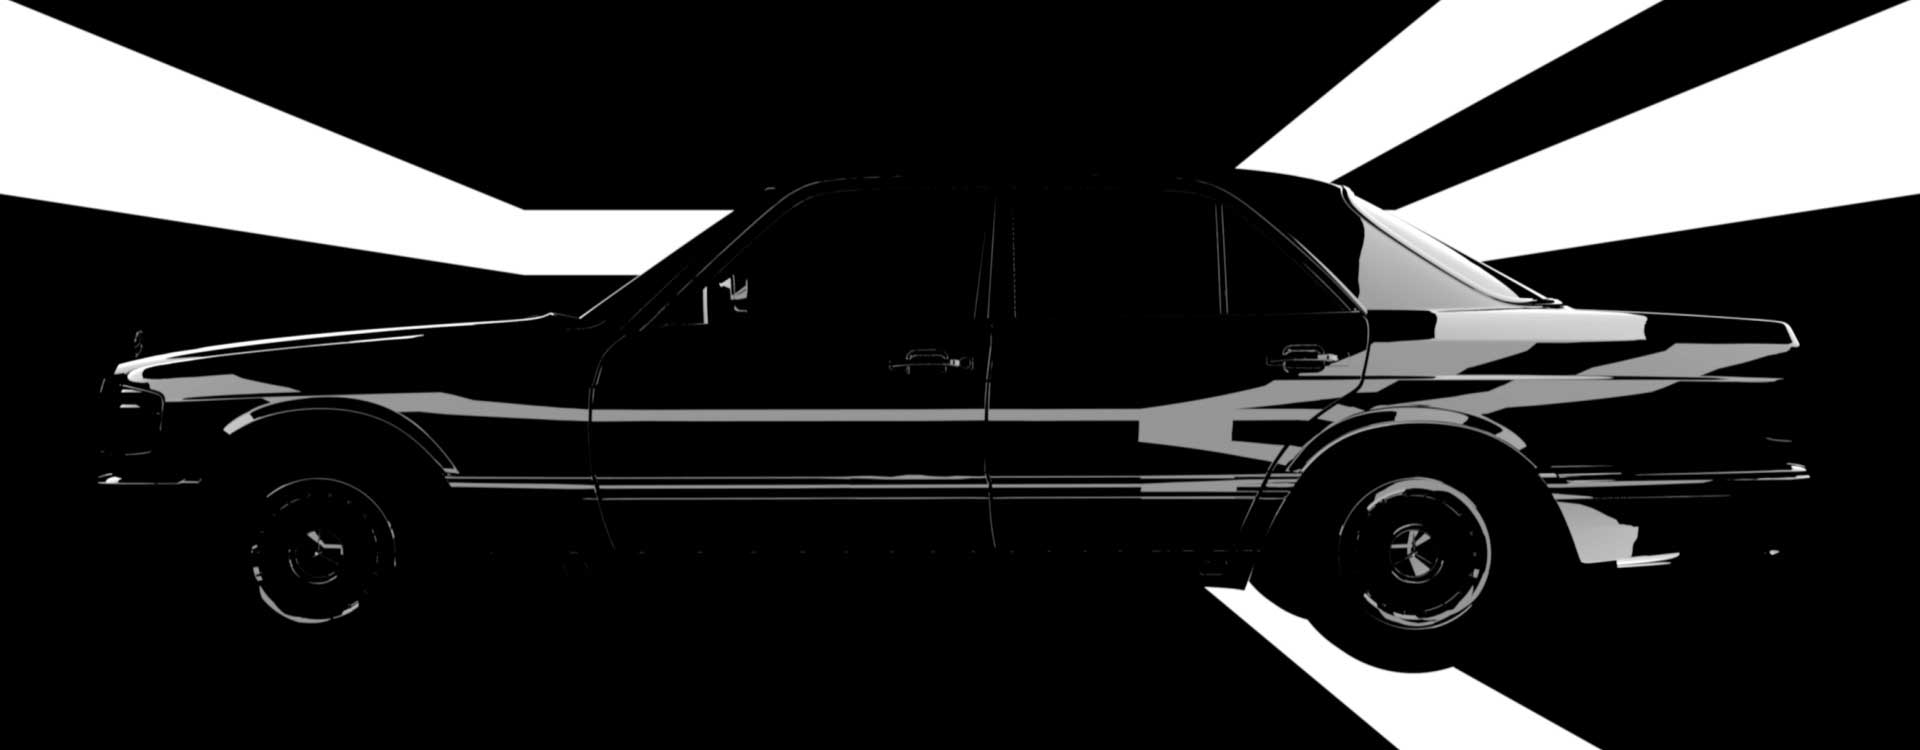 Car in black. Still from Mercedes-Benz Commercial.